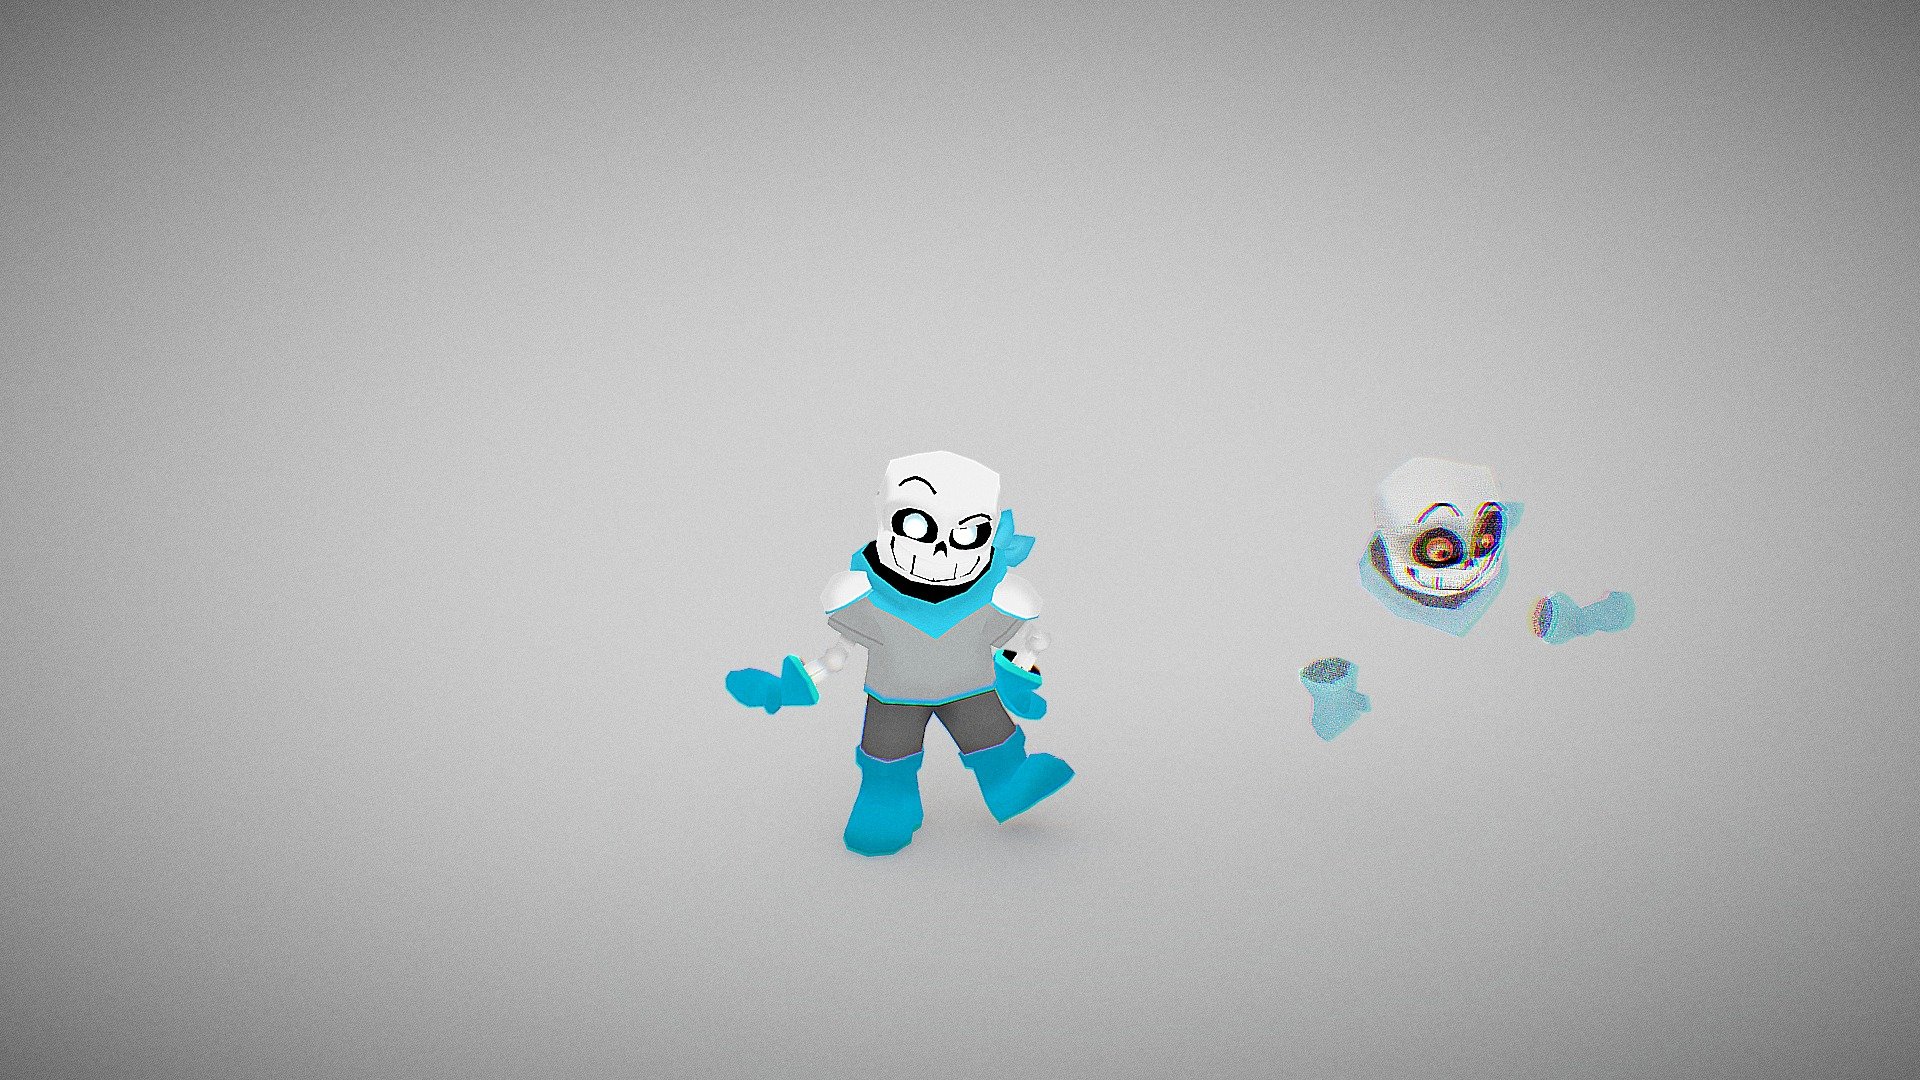 Made these 2 around the same time I made the Papyrus's 

Undertale by Toby Fox - Underswap Sans + Dustswap Low-polyish Models - 3D model by DarksArtworks (@epicdarkcelebi94) 3d model